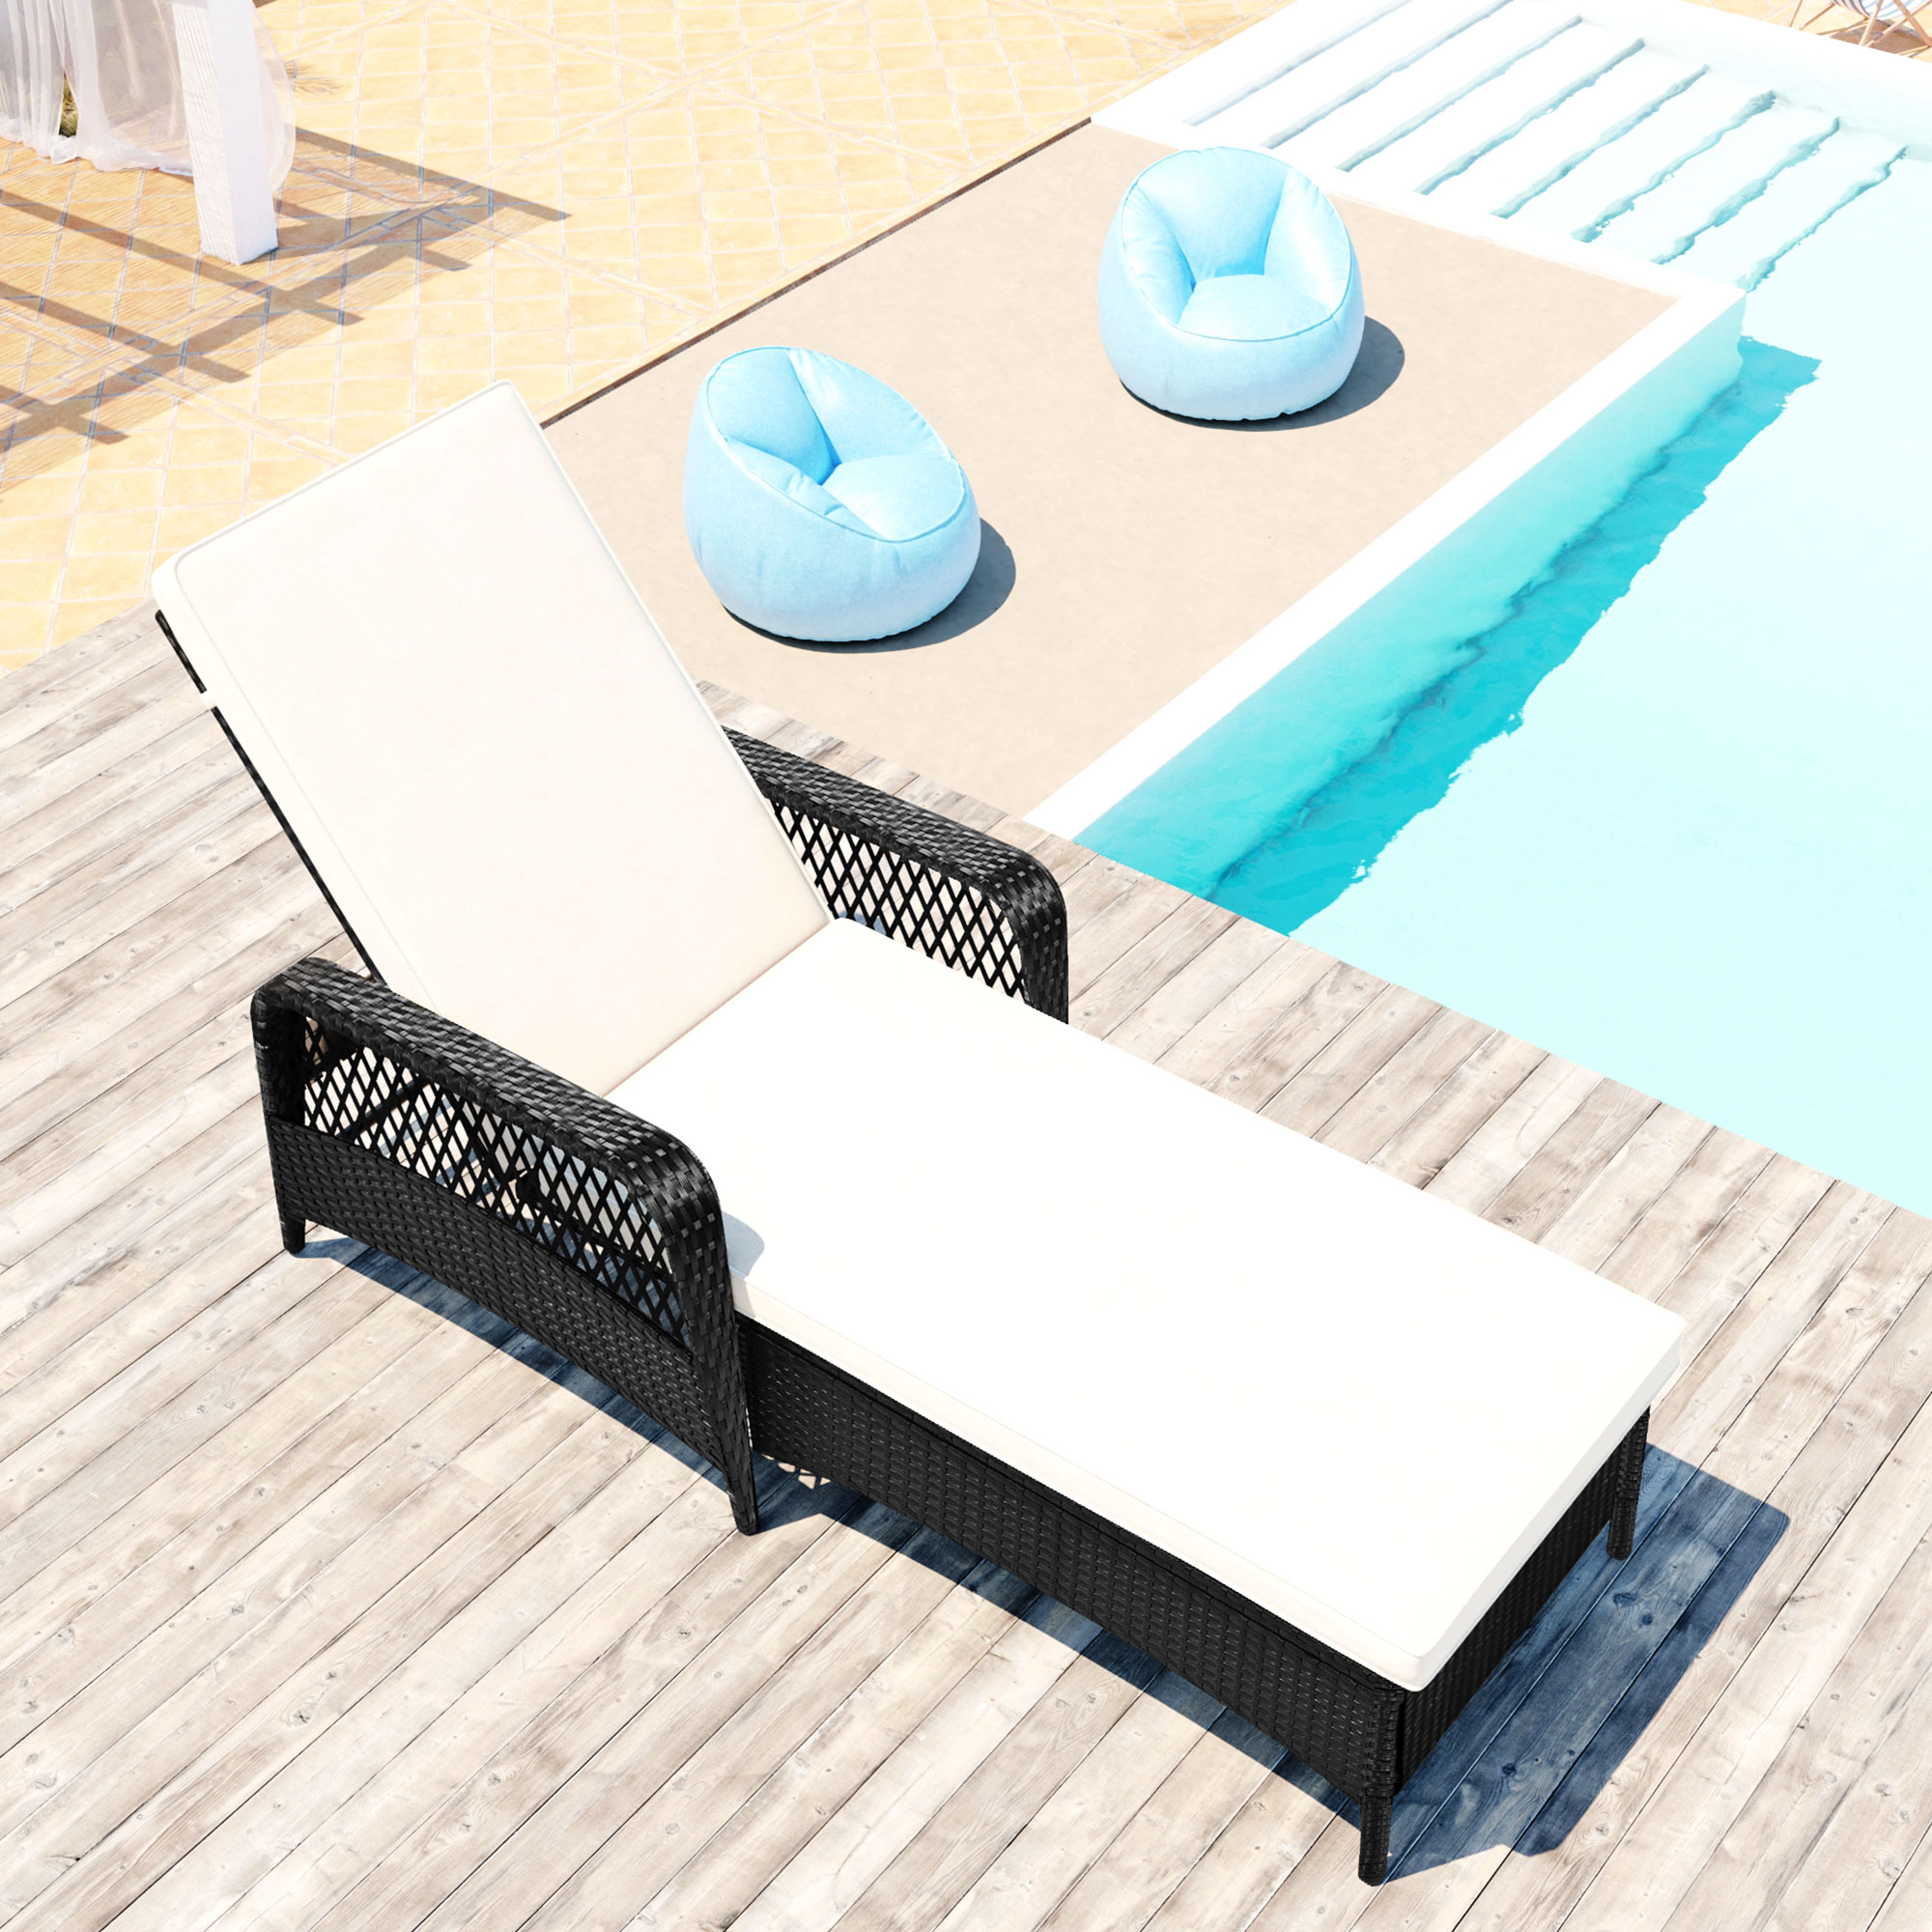 Patio Chaise Lounge Chair, Rattan Wicker Chaise Lounge, All-Weather Sun Chaise Lounge Furniture, Pool Furniture Sunbed with Removable Cushion, Tanning Lounge Chair with 5 Adjustable Positions, B336 - image 3 of 9